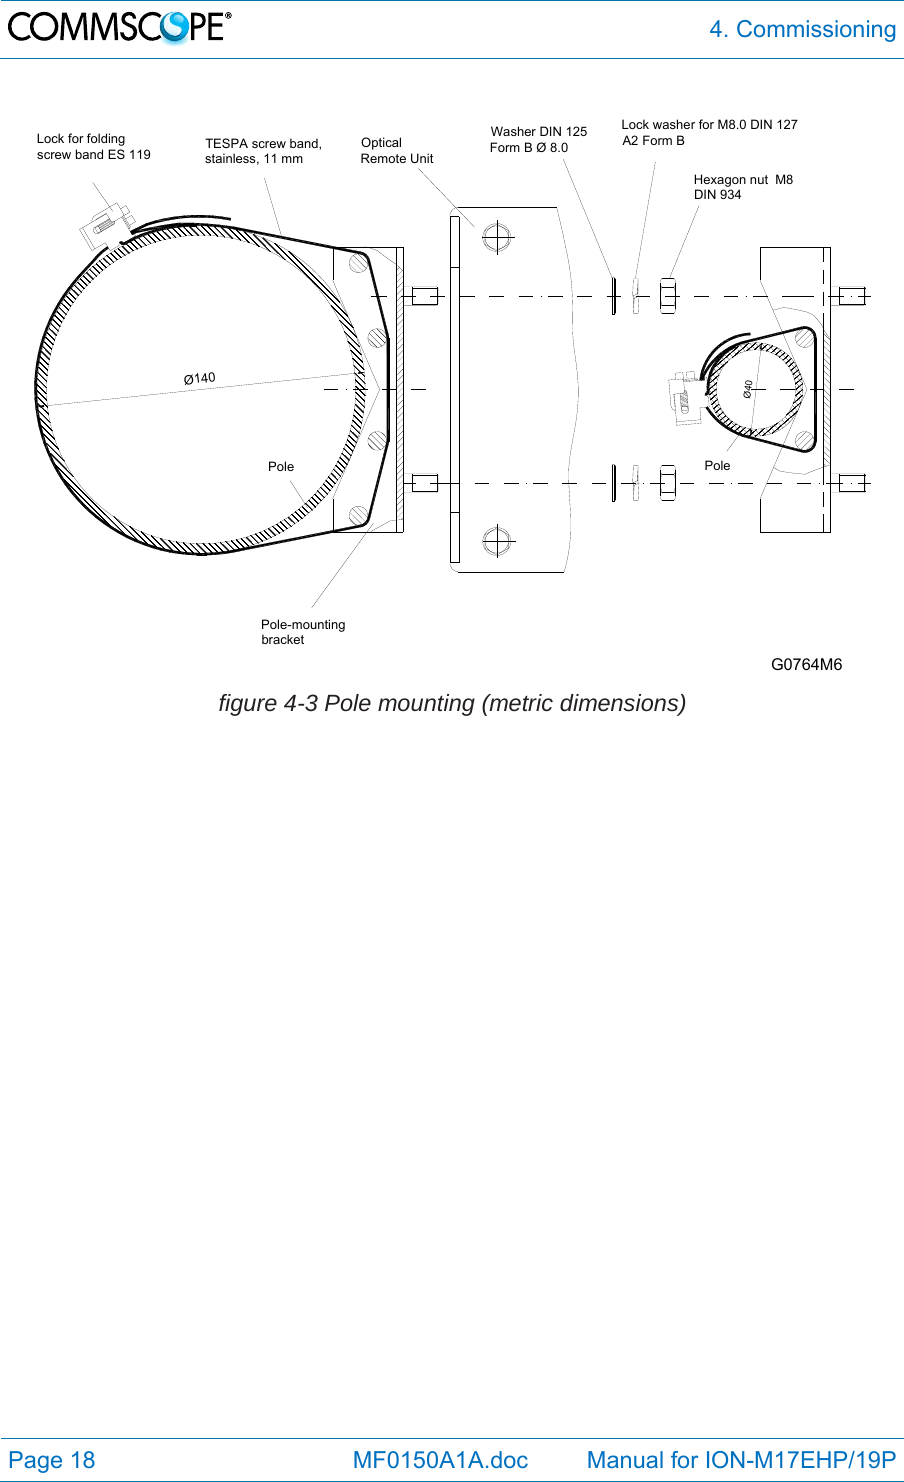  4. Commissioning Page 18            MF0150A1A.doc         Manual for ION-M17EHP/19P  G0764M6Lock for folding screw band ES 119 TESPA screw band, stainless, 11 mm Optical Remote UnitWasher DIN 125 Form B Ø 8.0Lock washer for M8.0 DIN 127 A2 Form B Hexagon nut  M8 DIN 934PolePolePole-mounting bracketØ140Ø40 figure 4-3 Pole mounting (metric dimensions)  